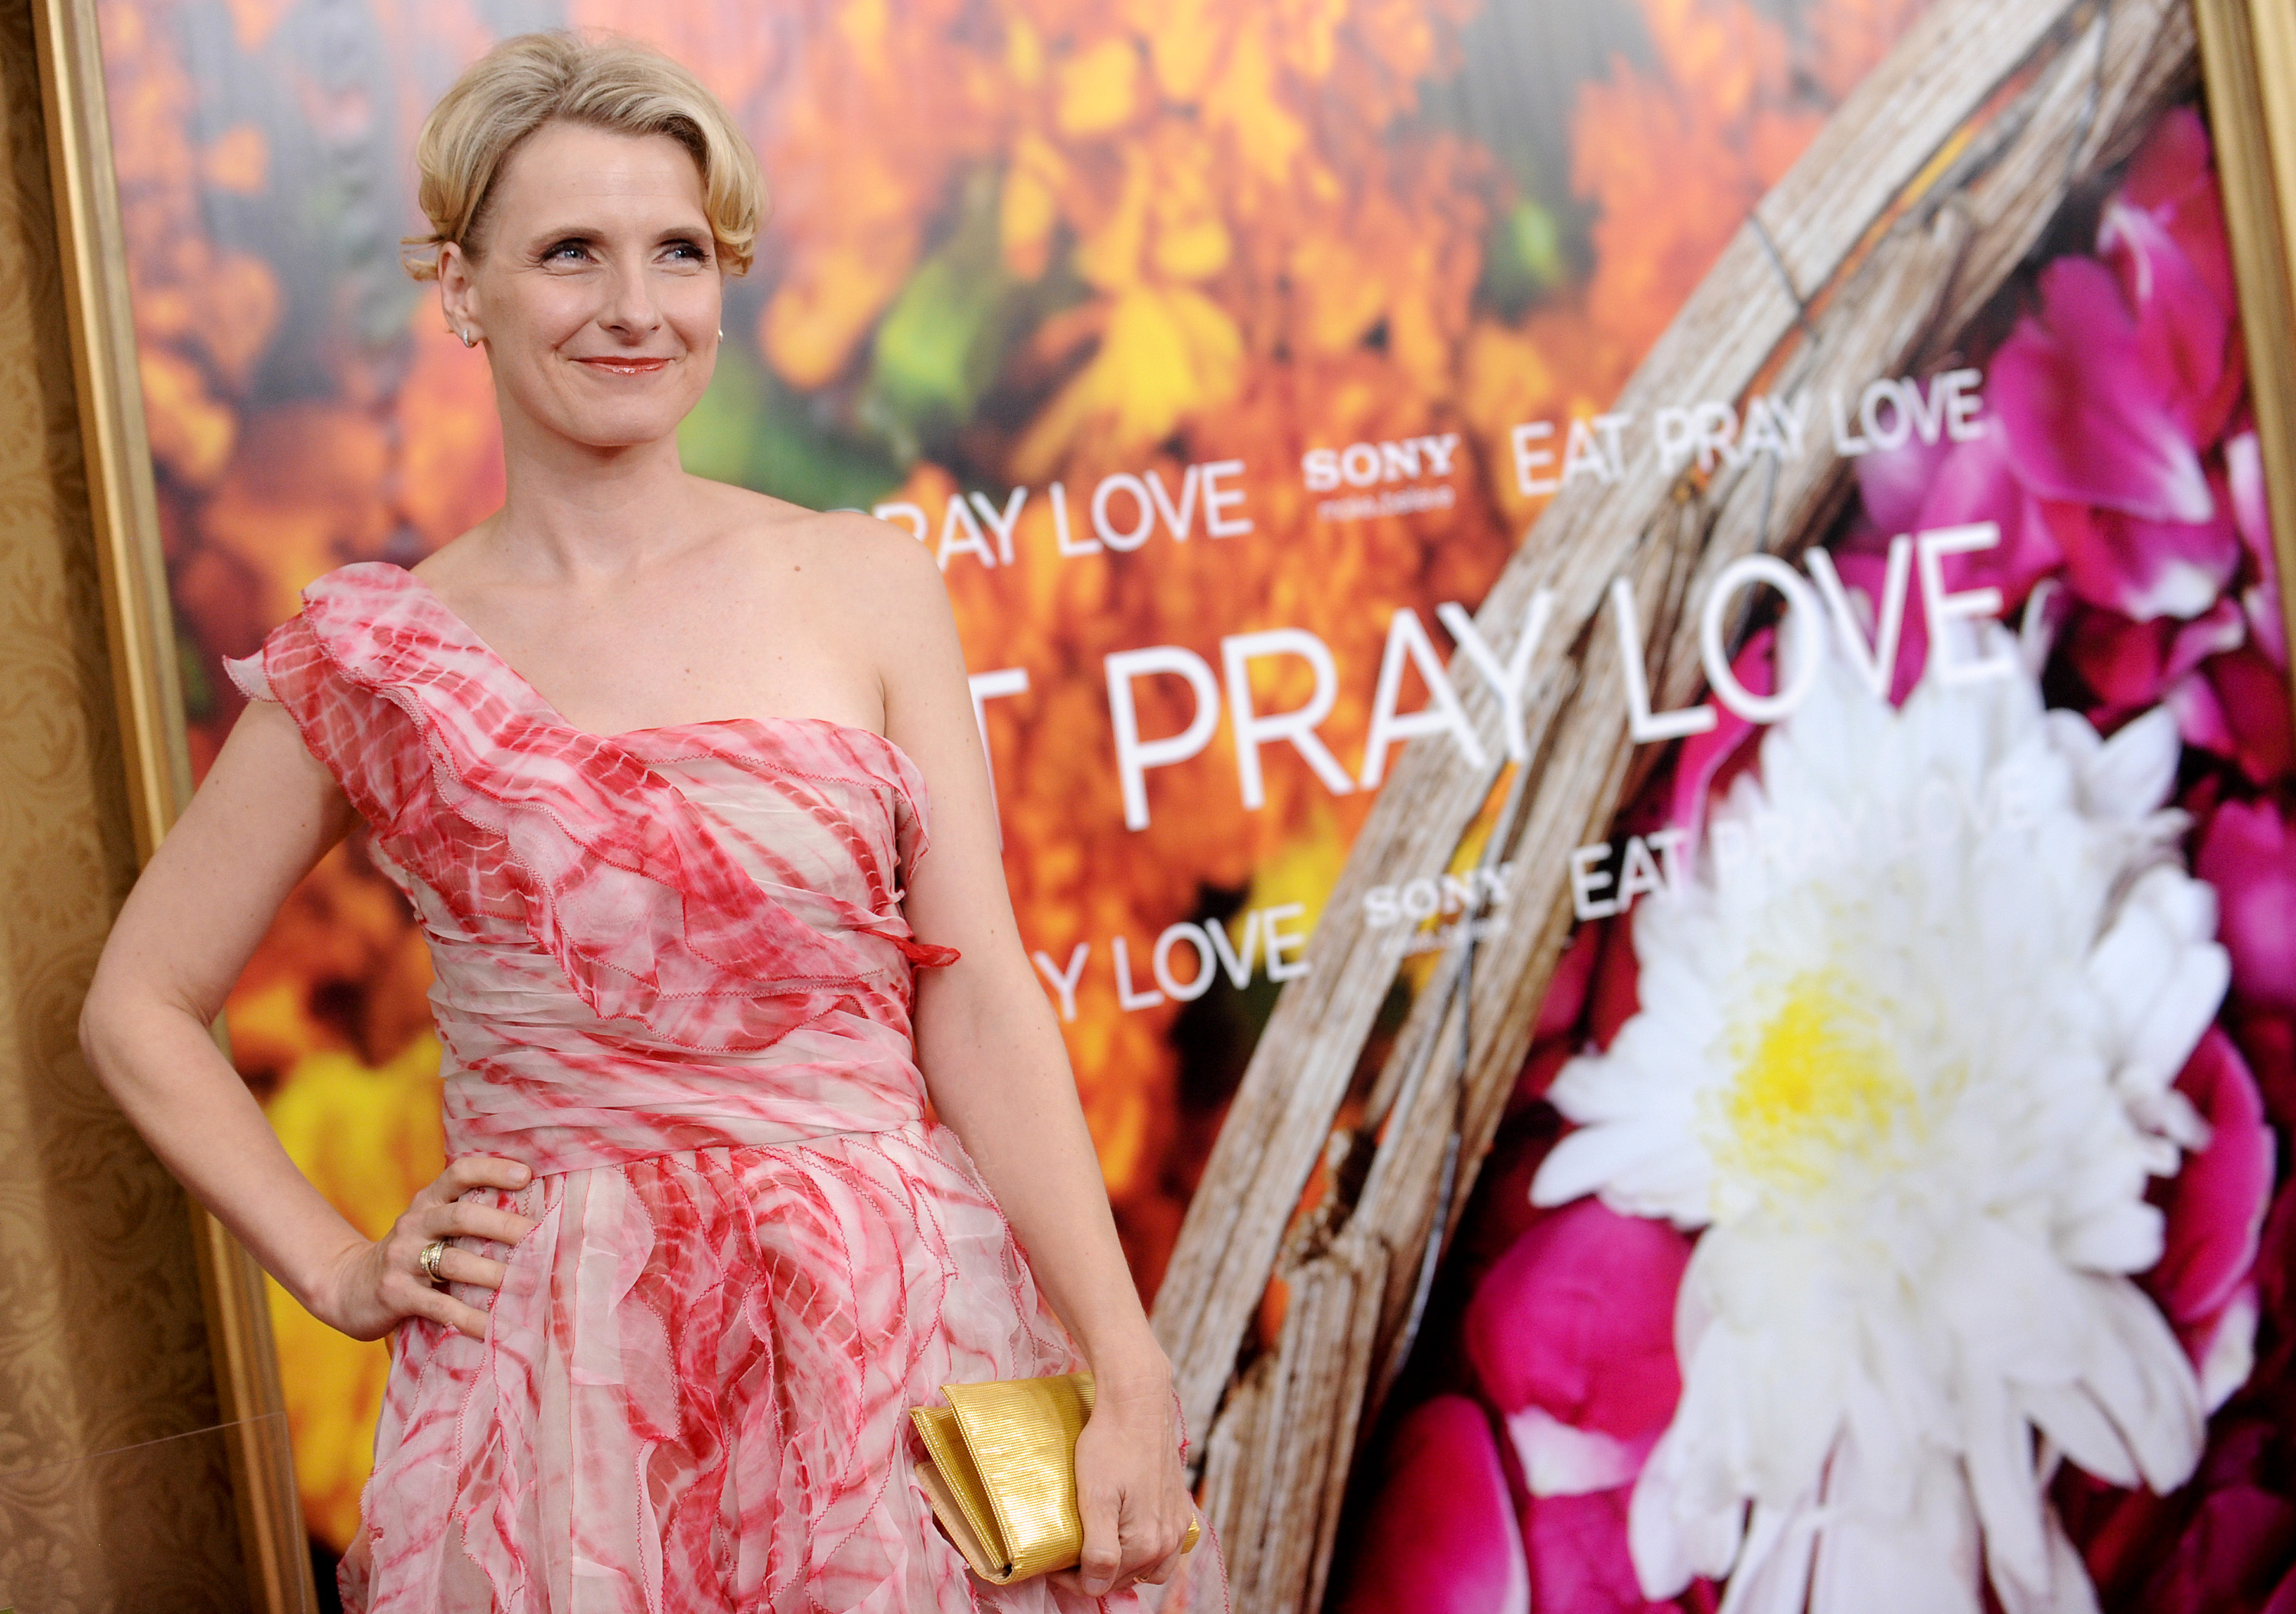 Author of ‘Eat Pray Love’ gives tips on how to be creative every day